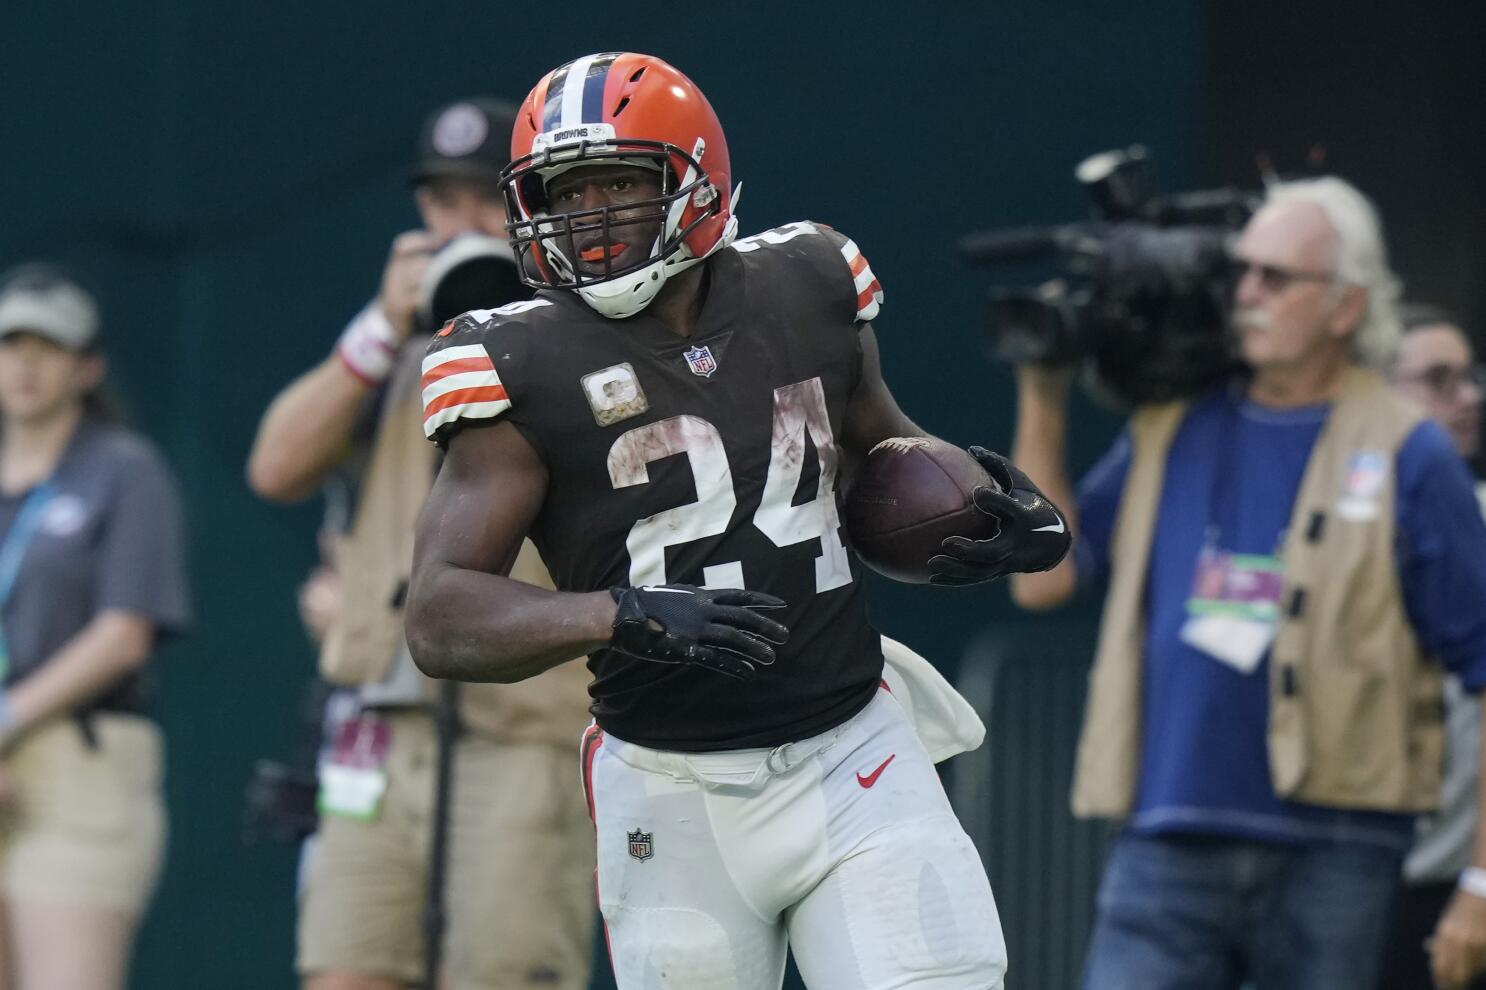 Cleveland Browns vs. Buffalo Bills in Detroit: How to buy tickets